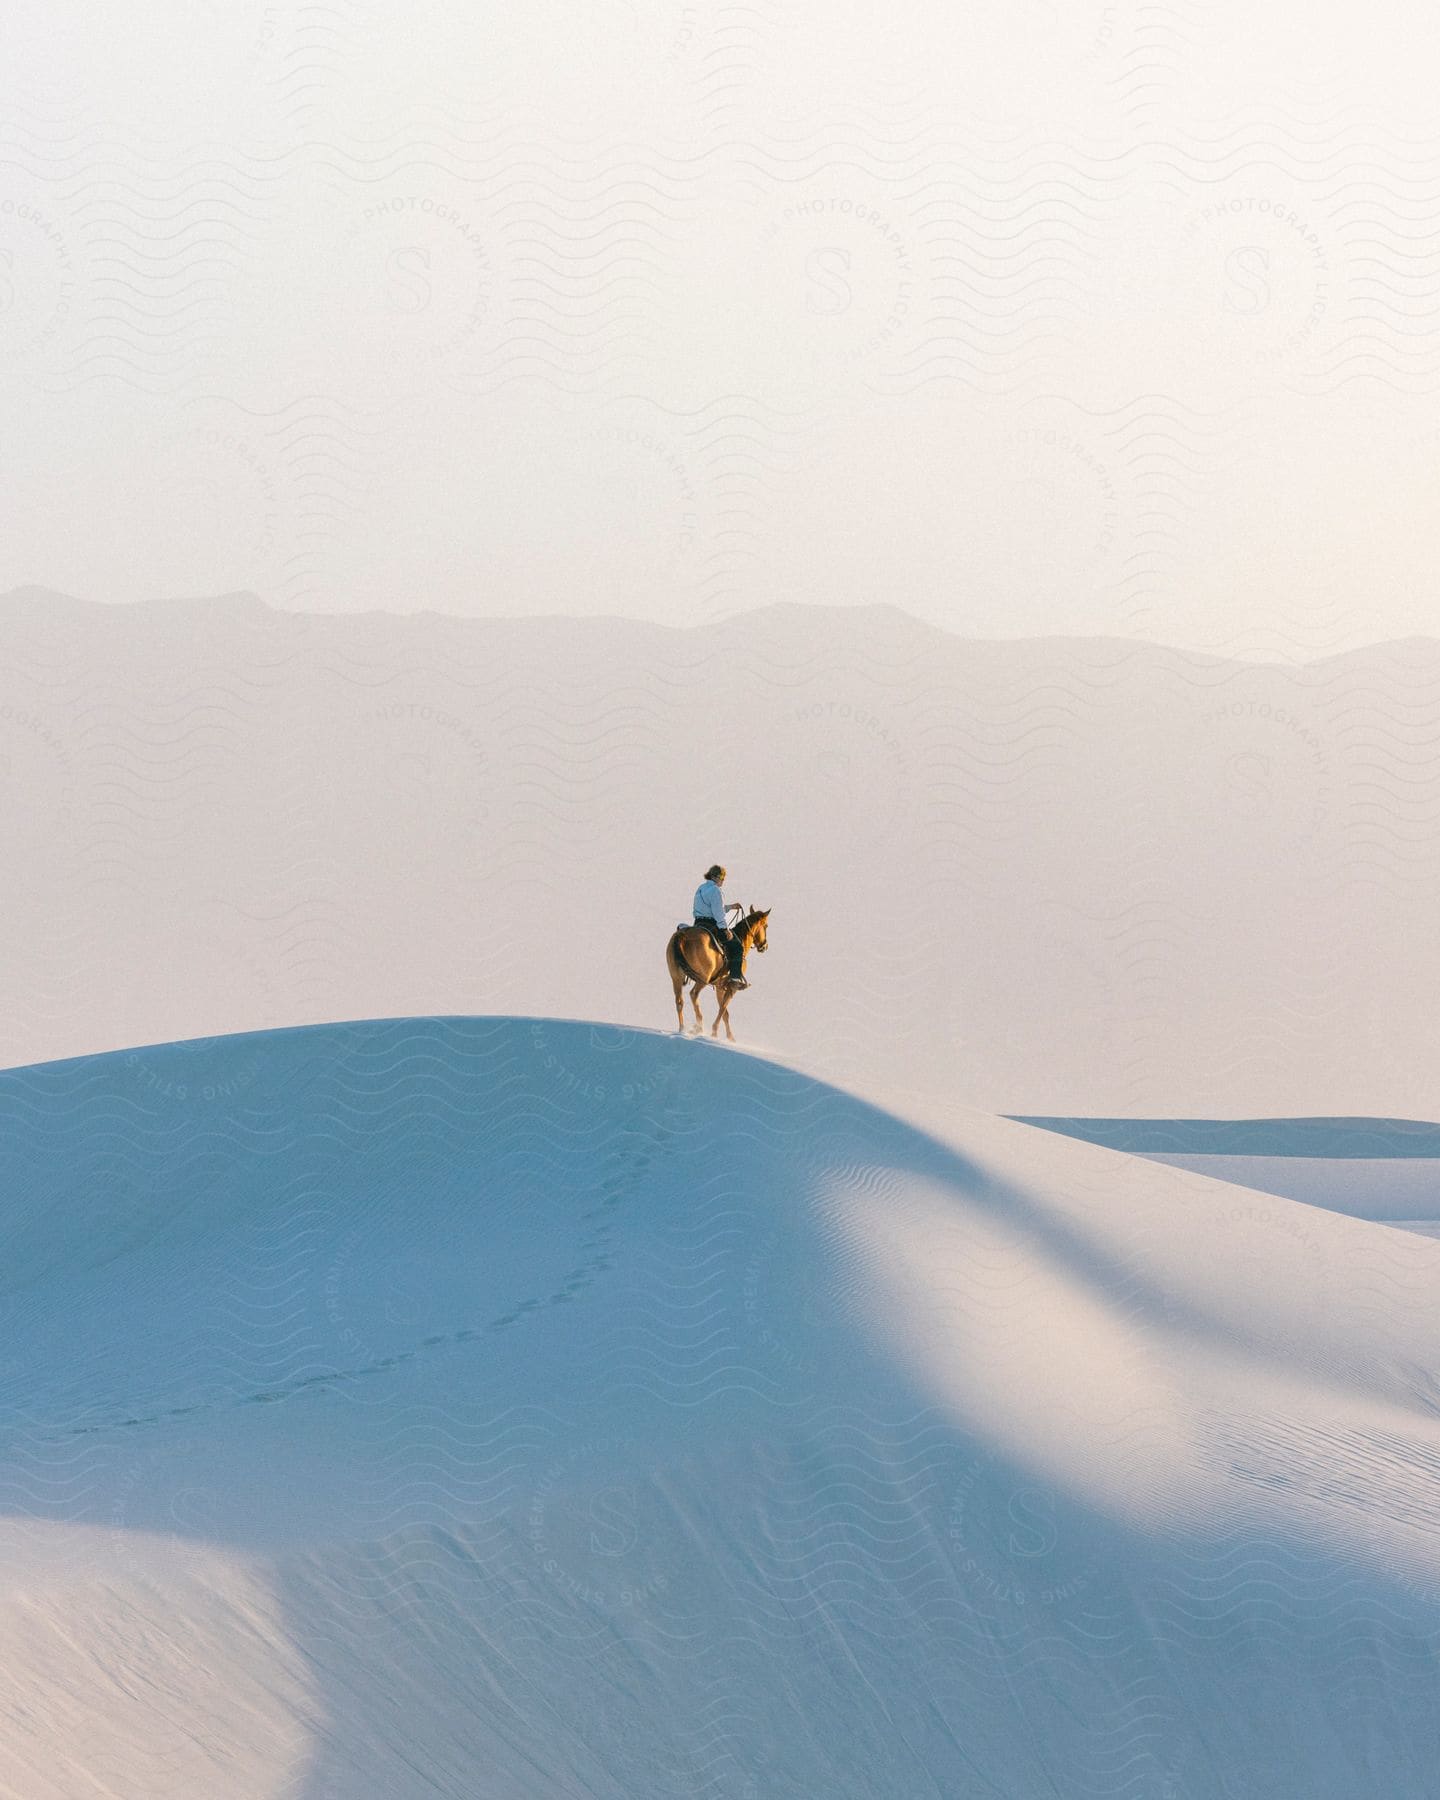 A person riding a horse over sand dunes in a desert region